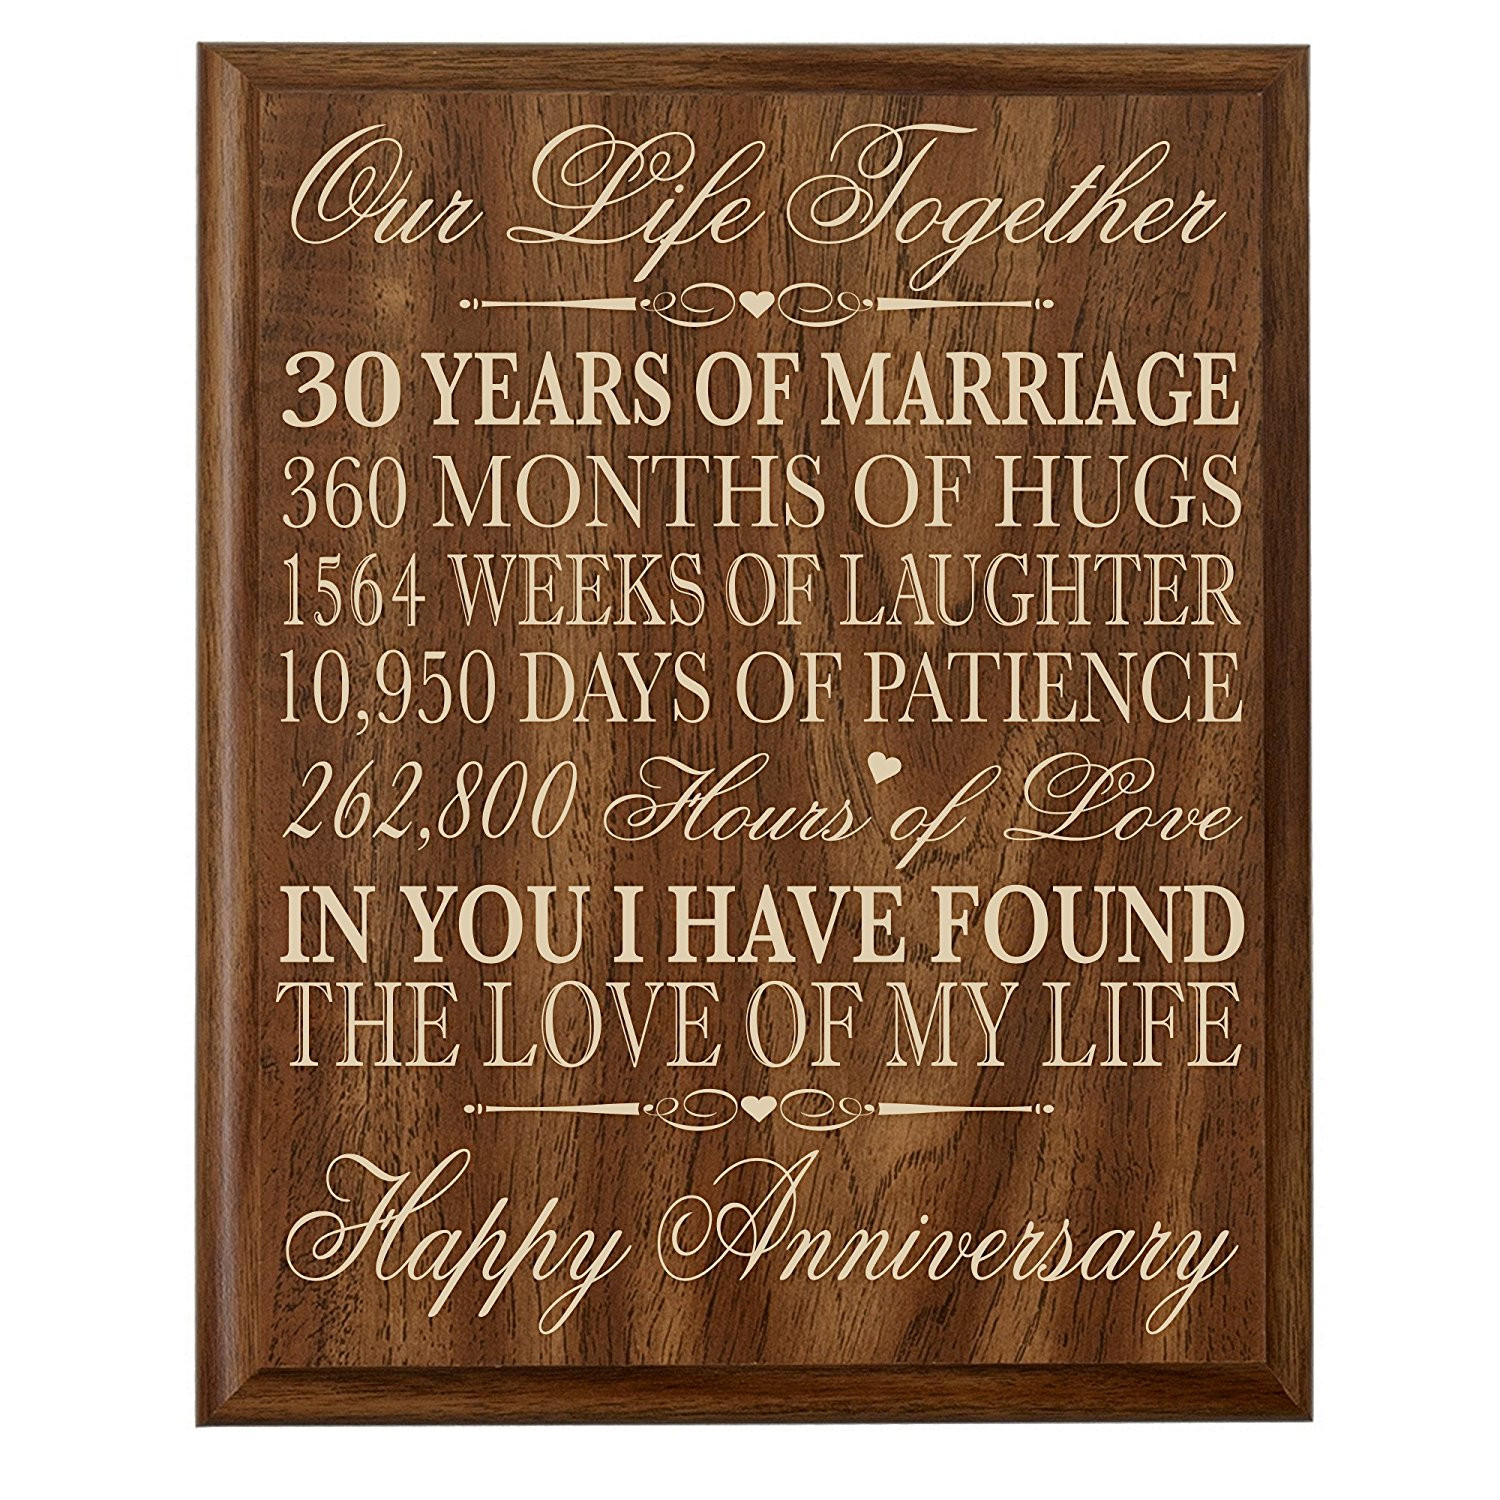 30 Year Anniversary Gift Ideas
 30th Anniversary Gift ideas Couple Parents 30 year